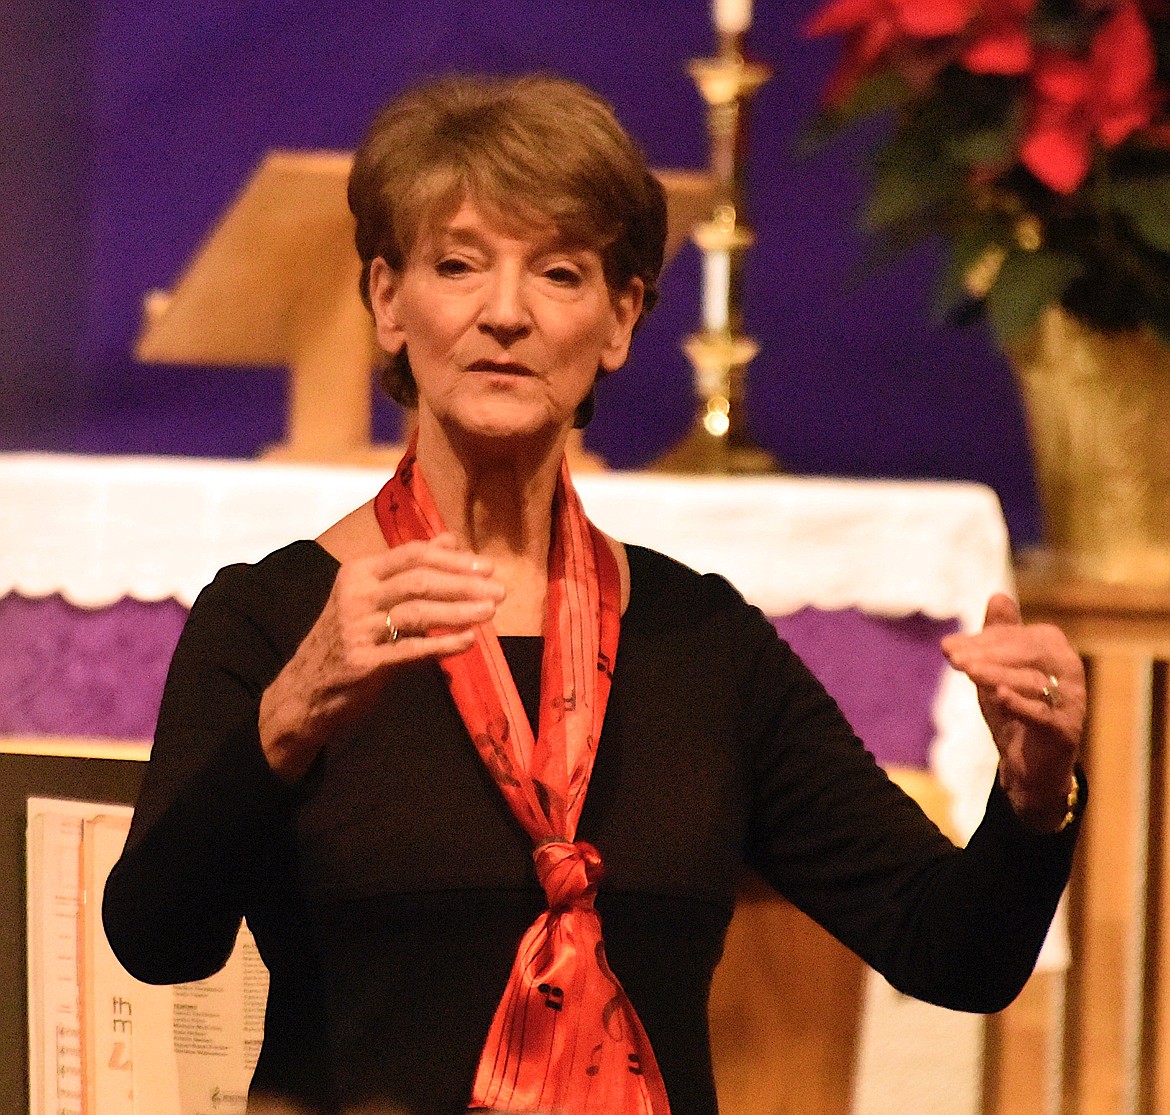 Mission Valley Choral Society Director Cathy Gillhouse talks to the audience during Sunday's performance at the Good Shepherd Lutheran Church. (Berl Tiskus/Leader)